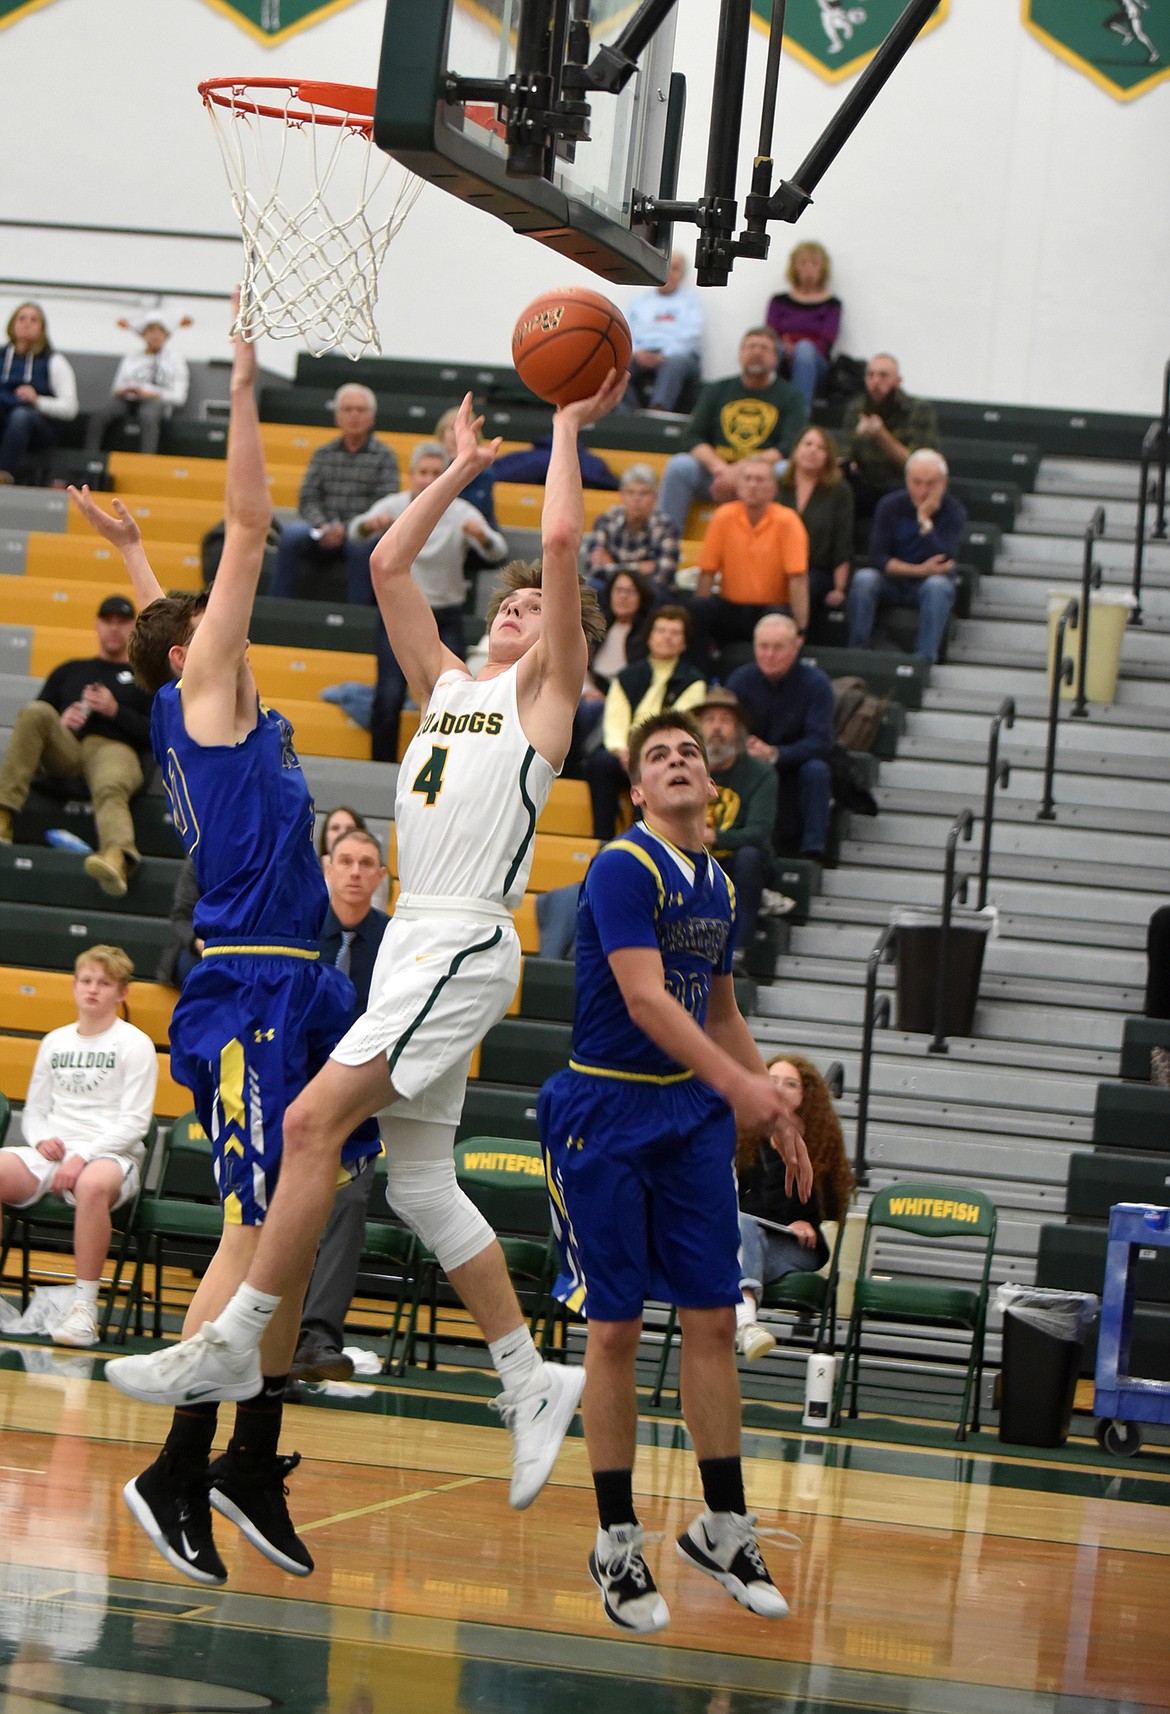 Bulldog Bodie Smith goes up for the basket in the fourth quarter against the Loggers at  the Whitefish High School gym. (Heidi Desch/Whitefish Pilot)